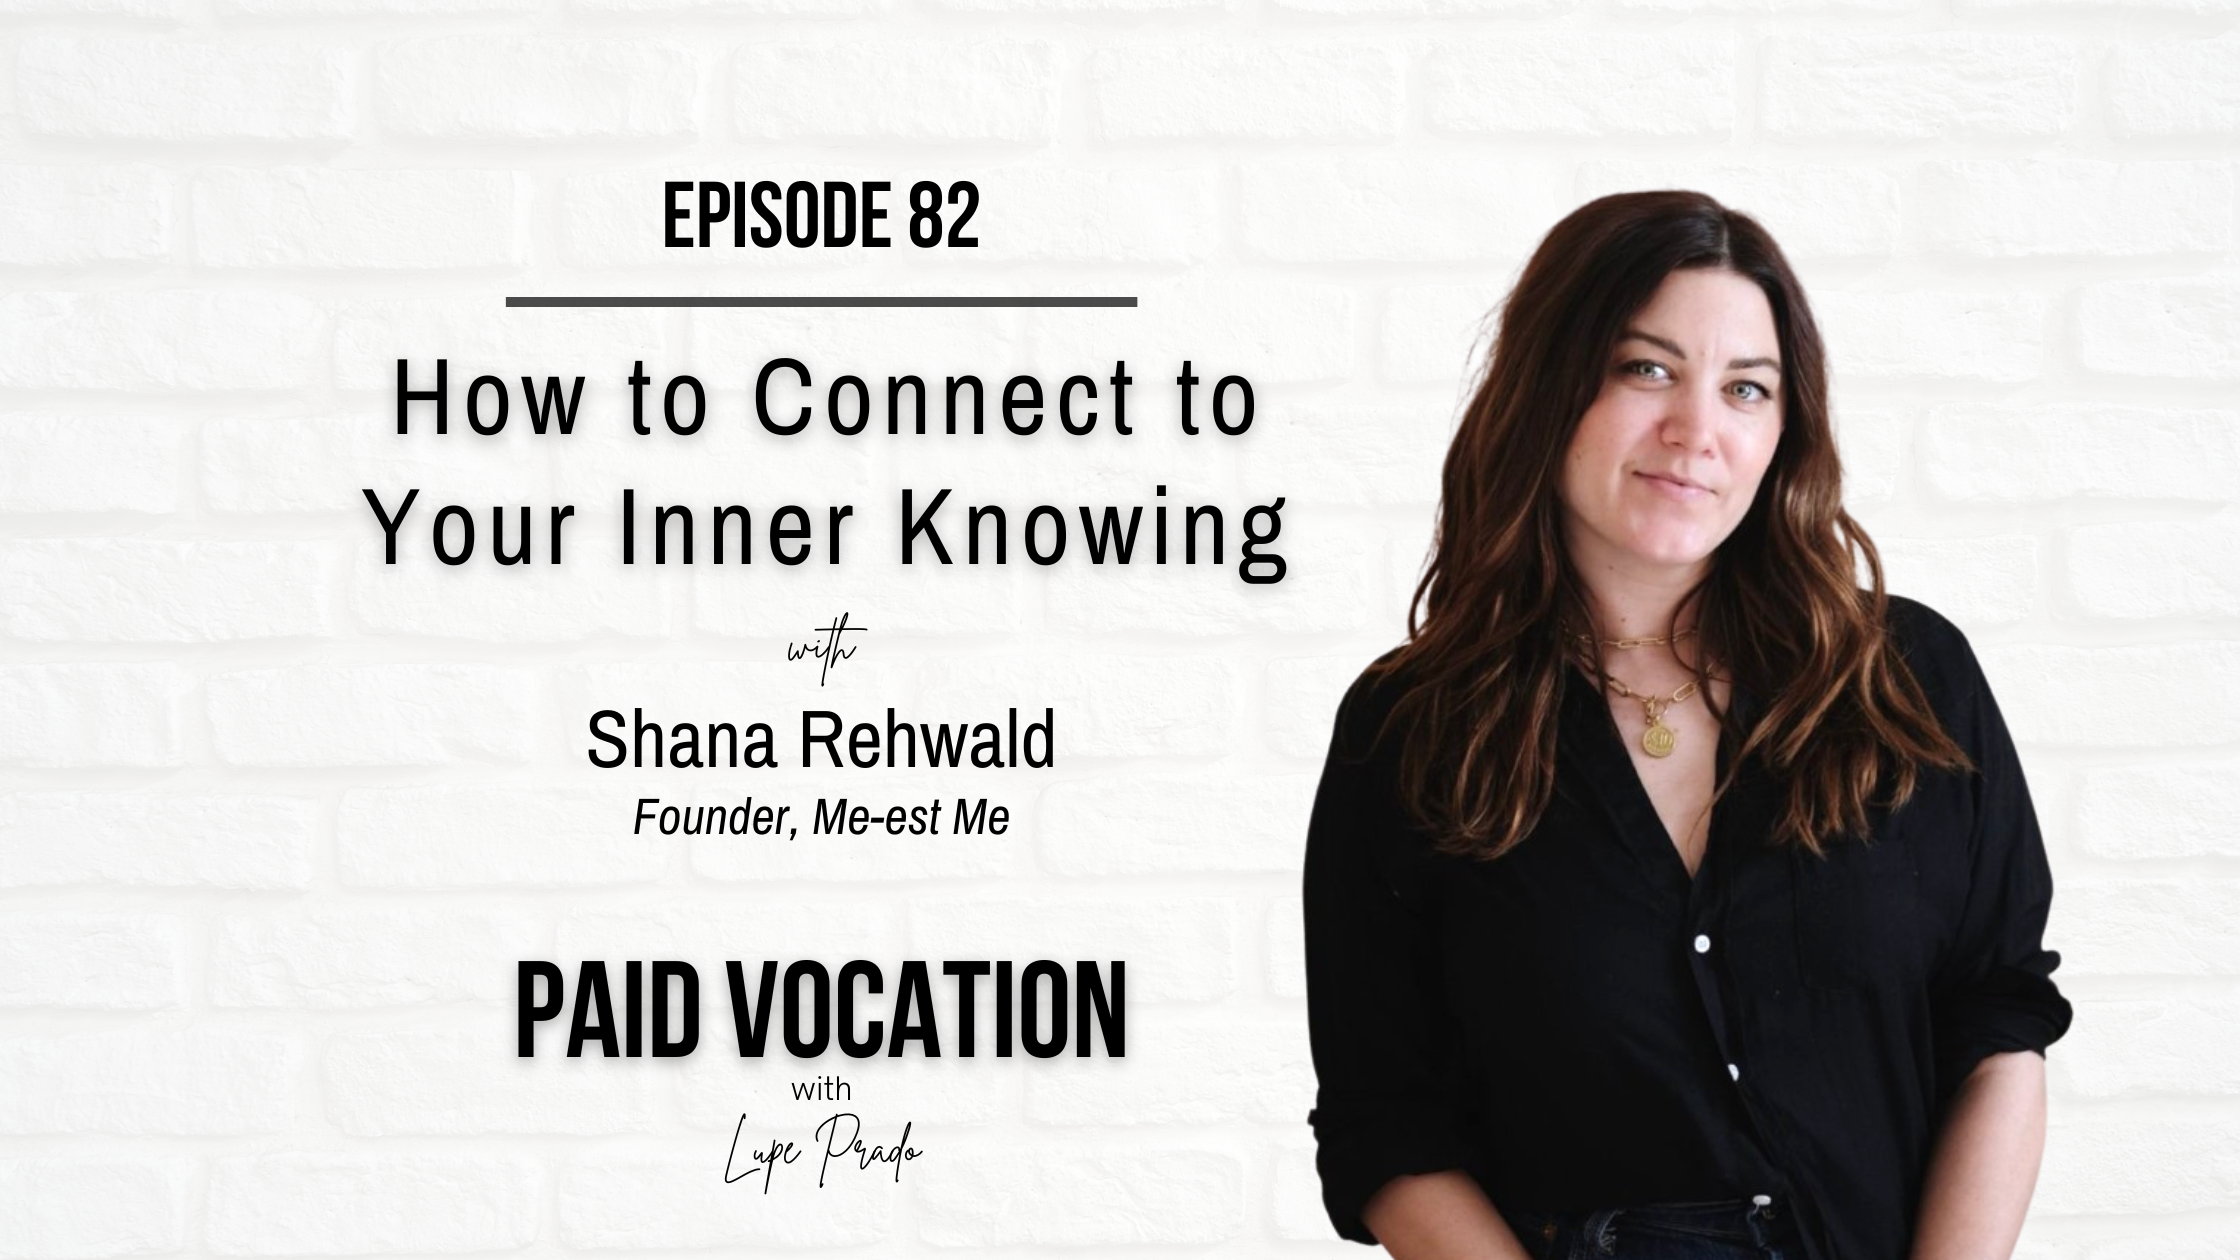 How to Connect to Your Inner Knowing with Shana Rehwald